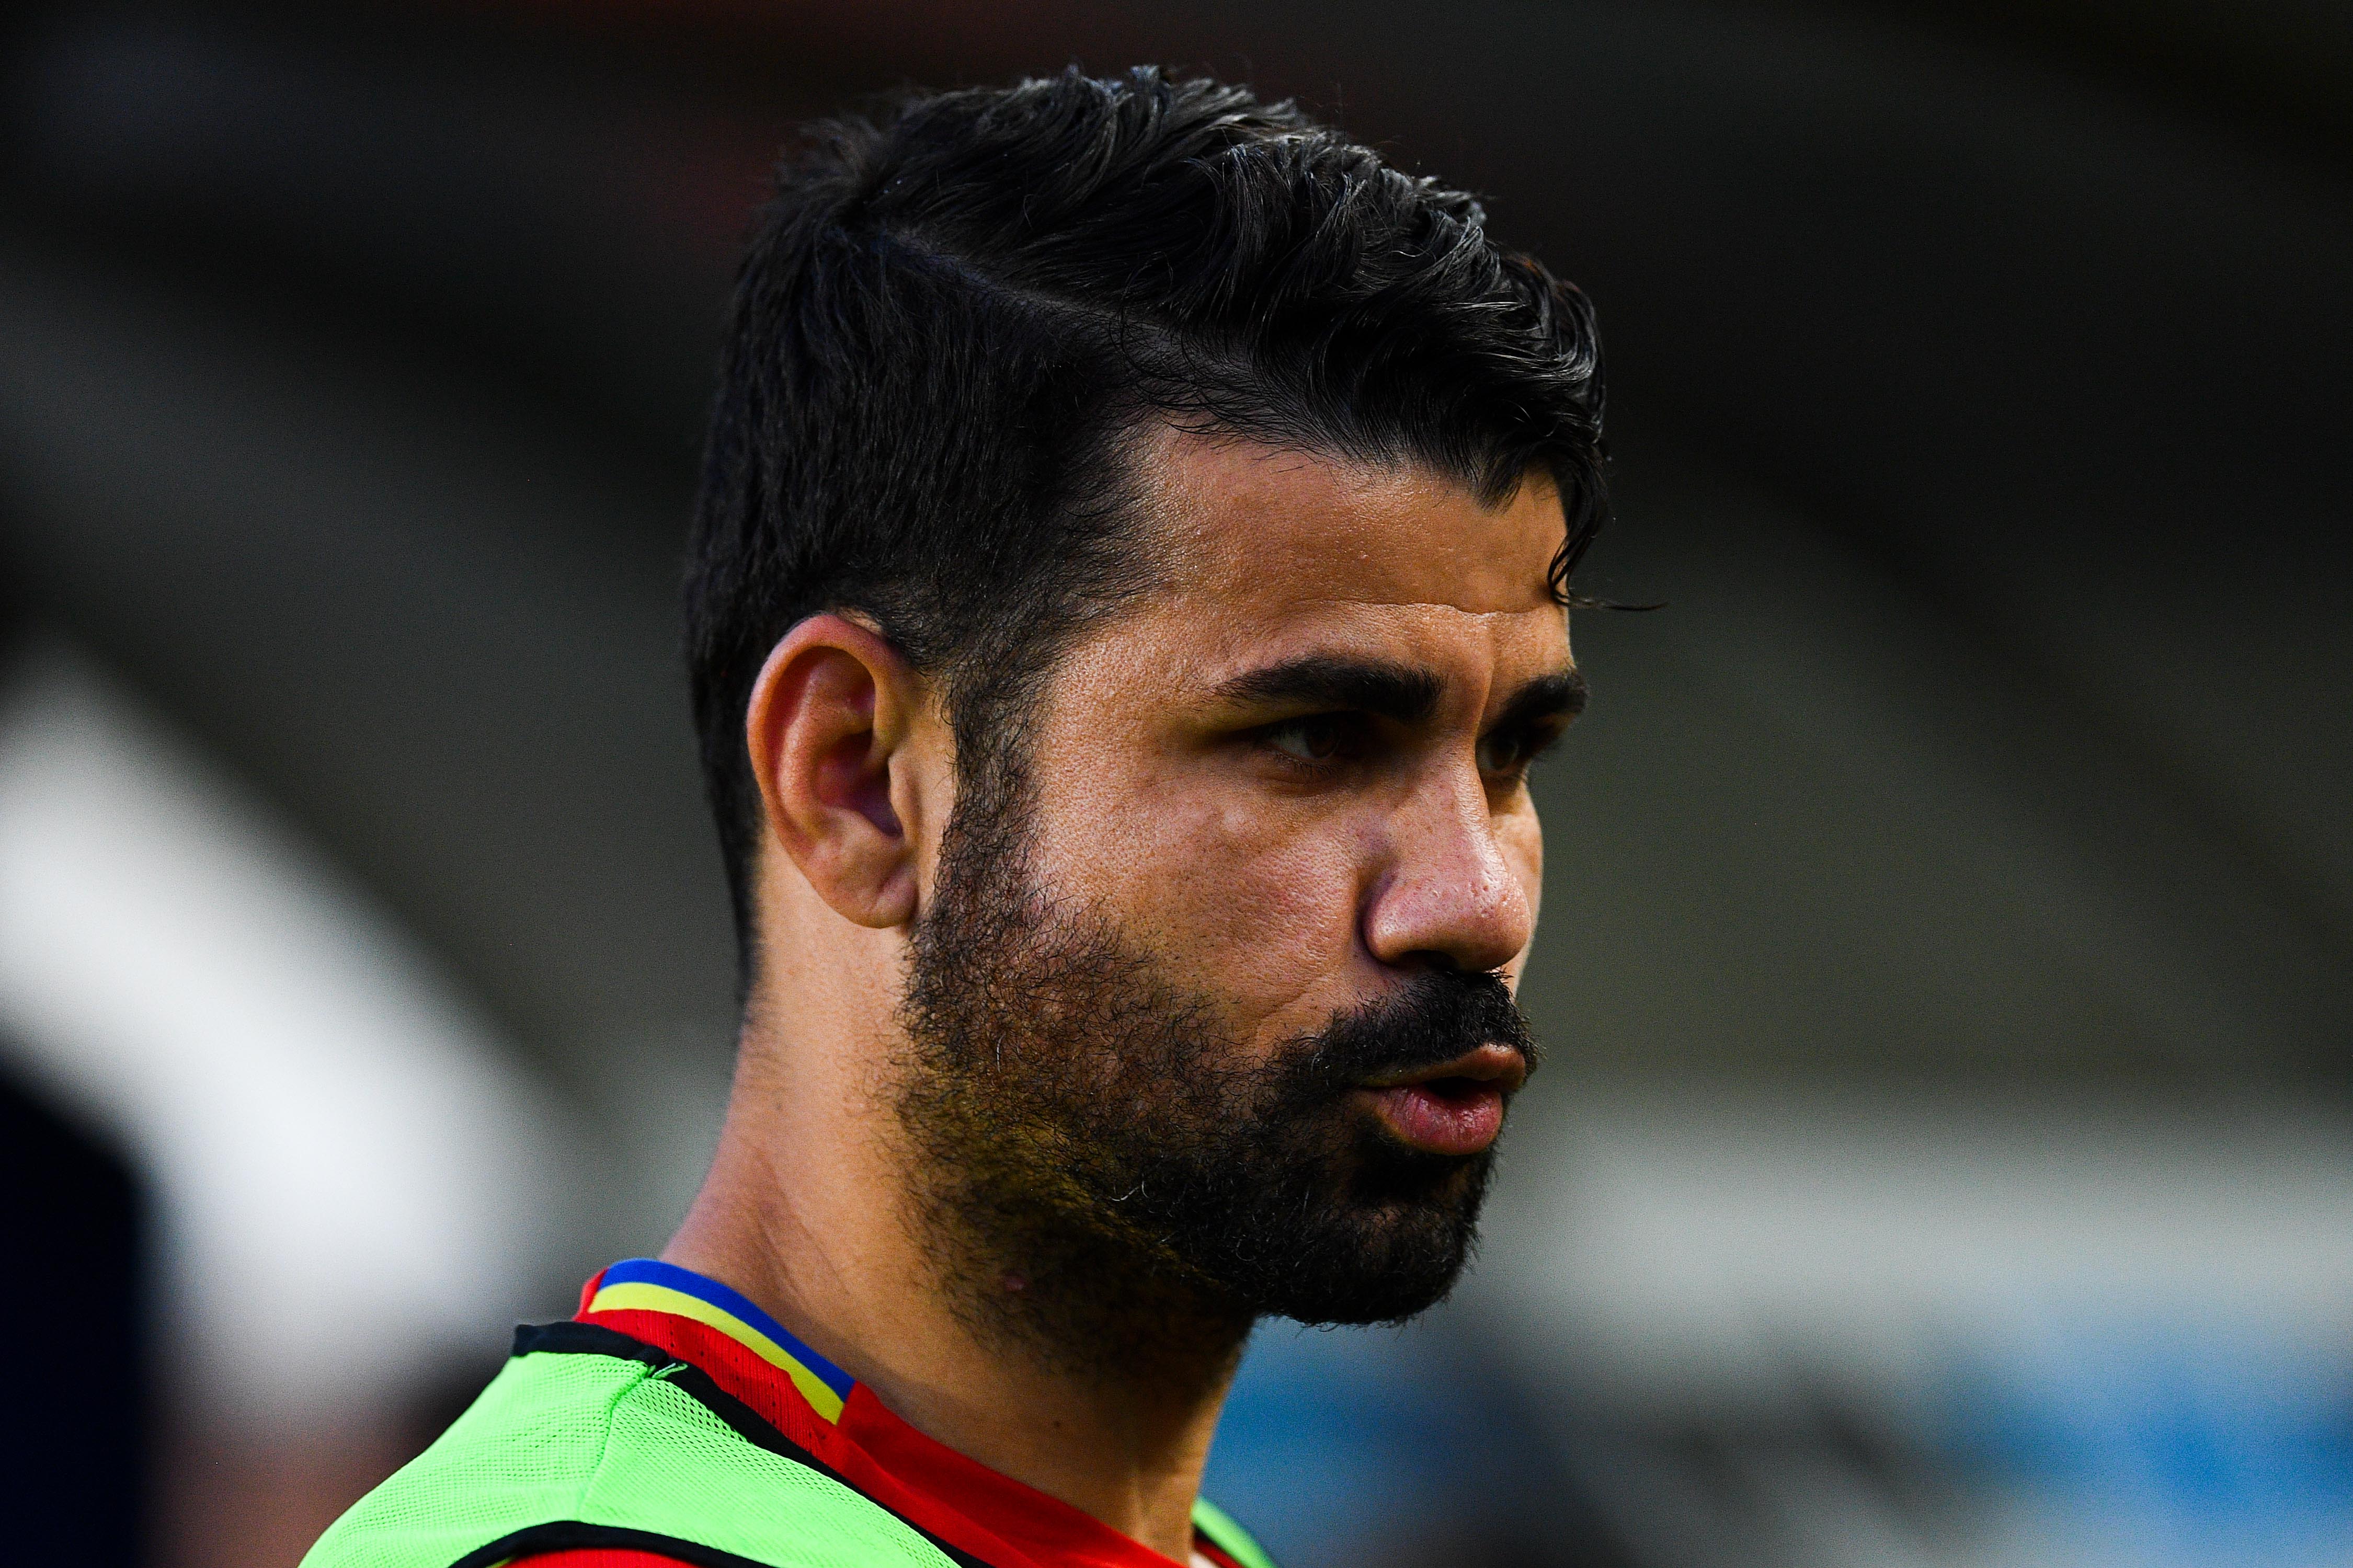 Does Costa still have a future at Chelsea? (Photo courtesy - David Ramos/Getty Images)